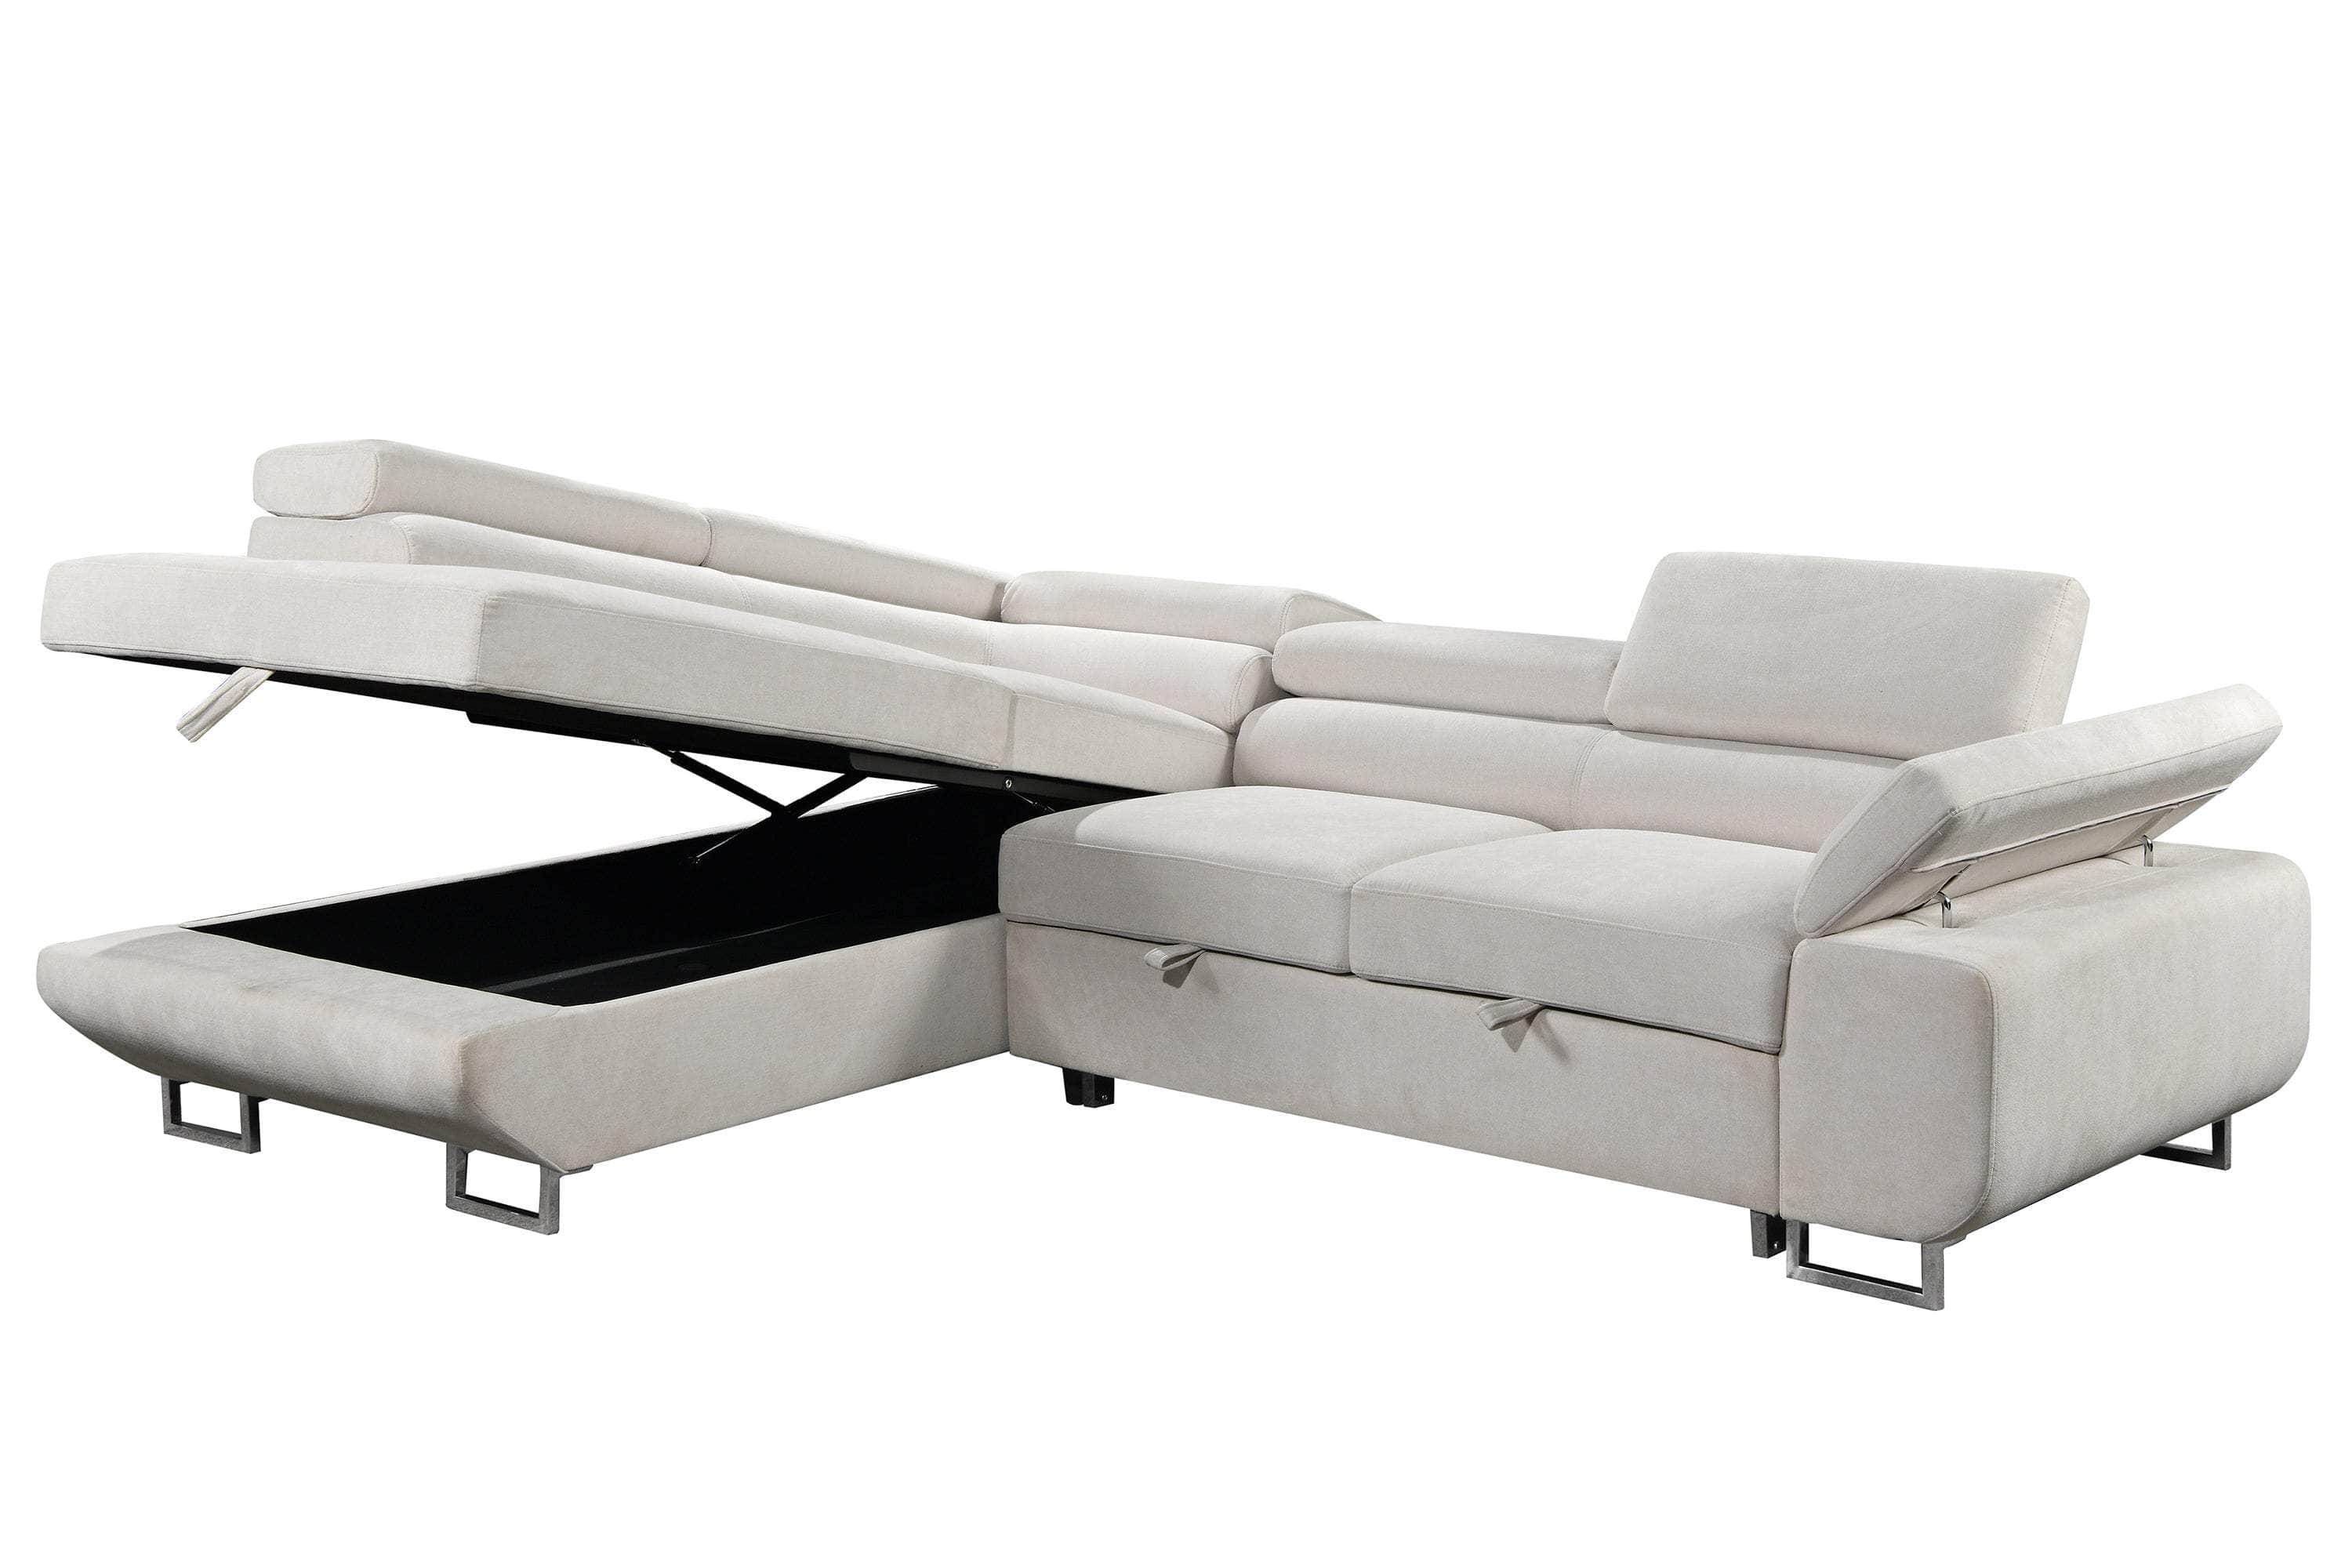 Urban Cali Sectional Sofa Left Facing Chaise Hollywood Sleeper Sectional Sofa Bed with Adjustable Headrests and Storage Chaise in Ulani Cream